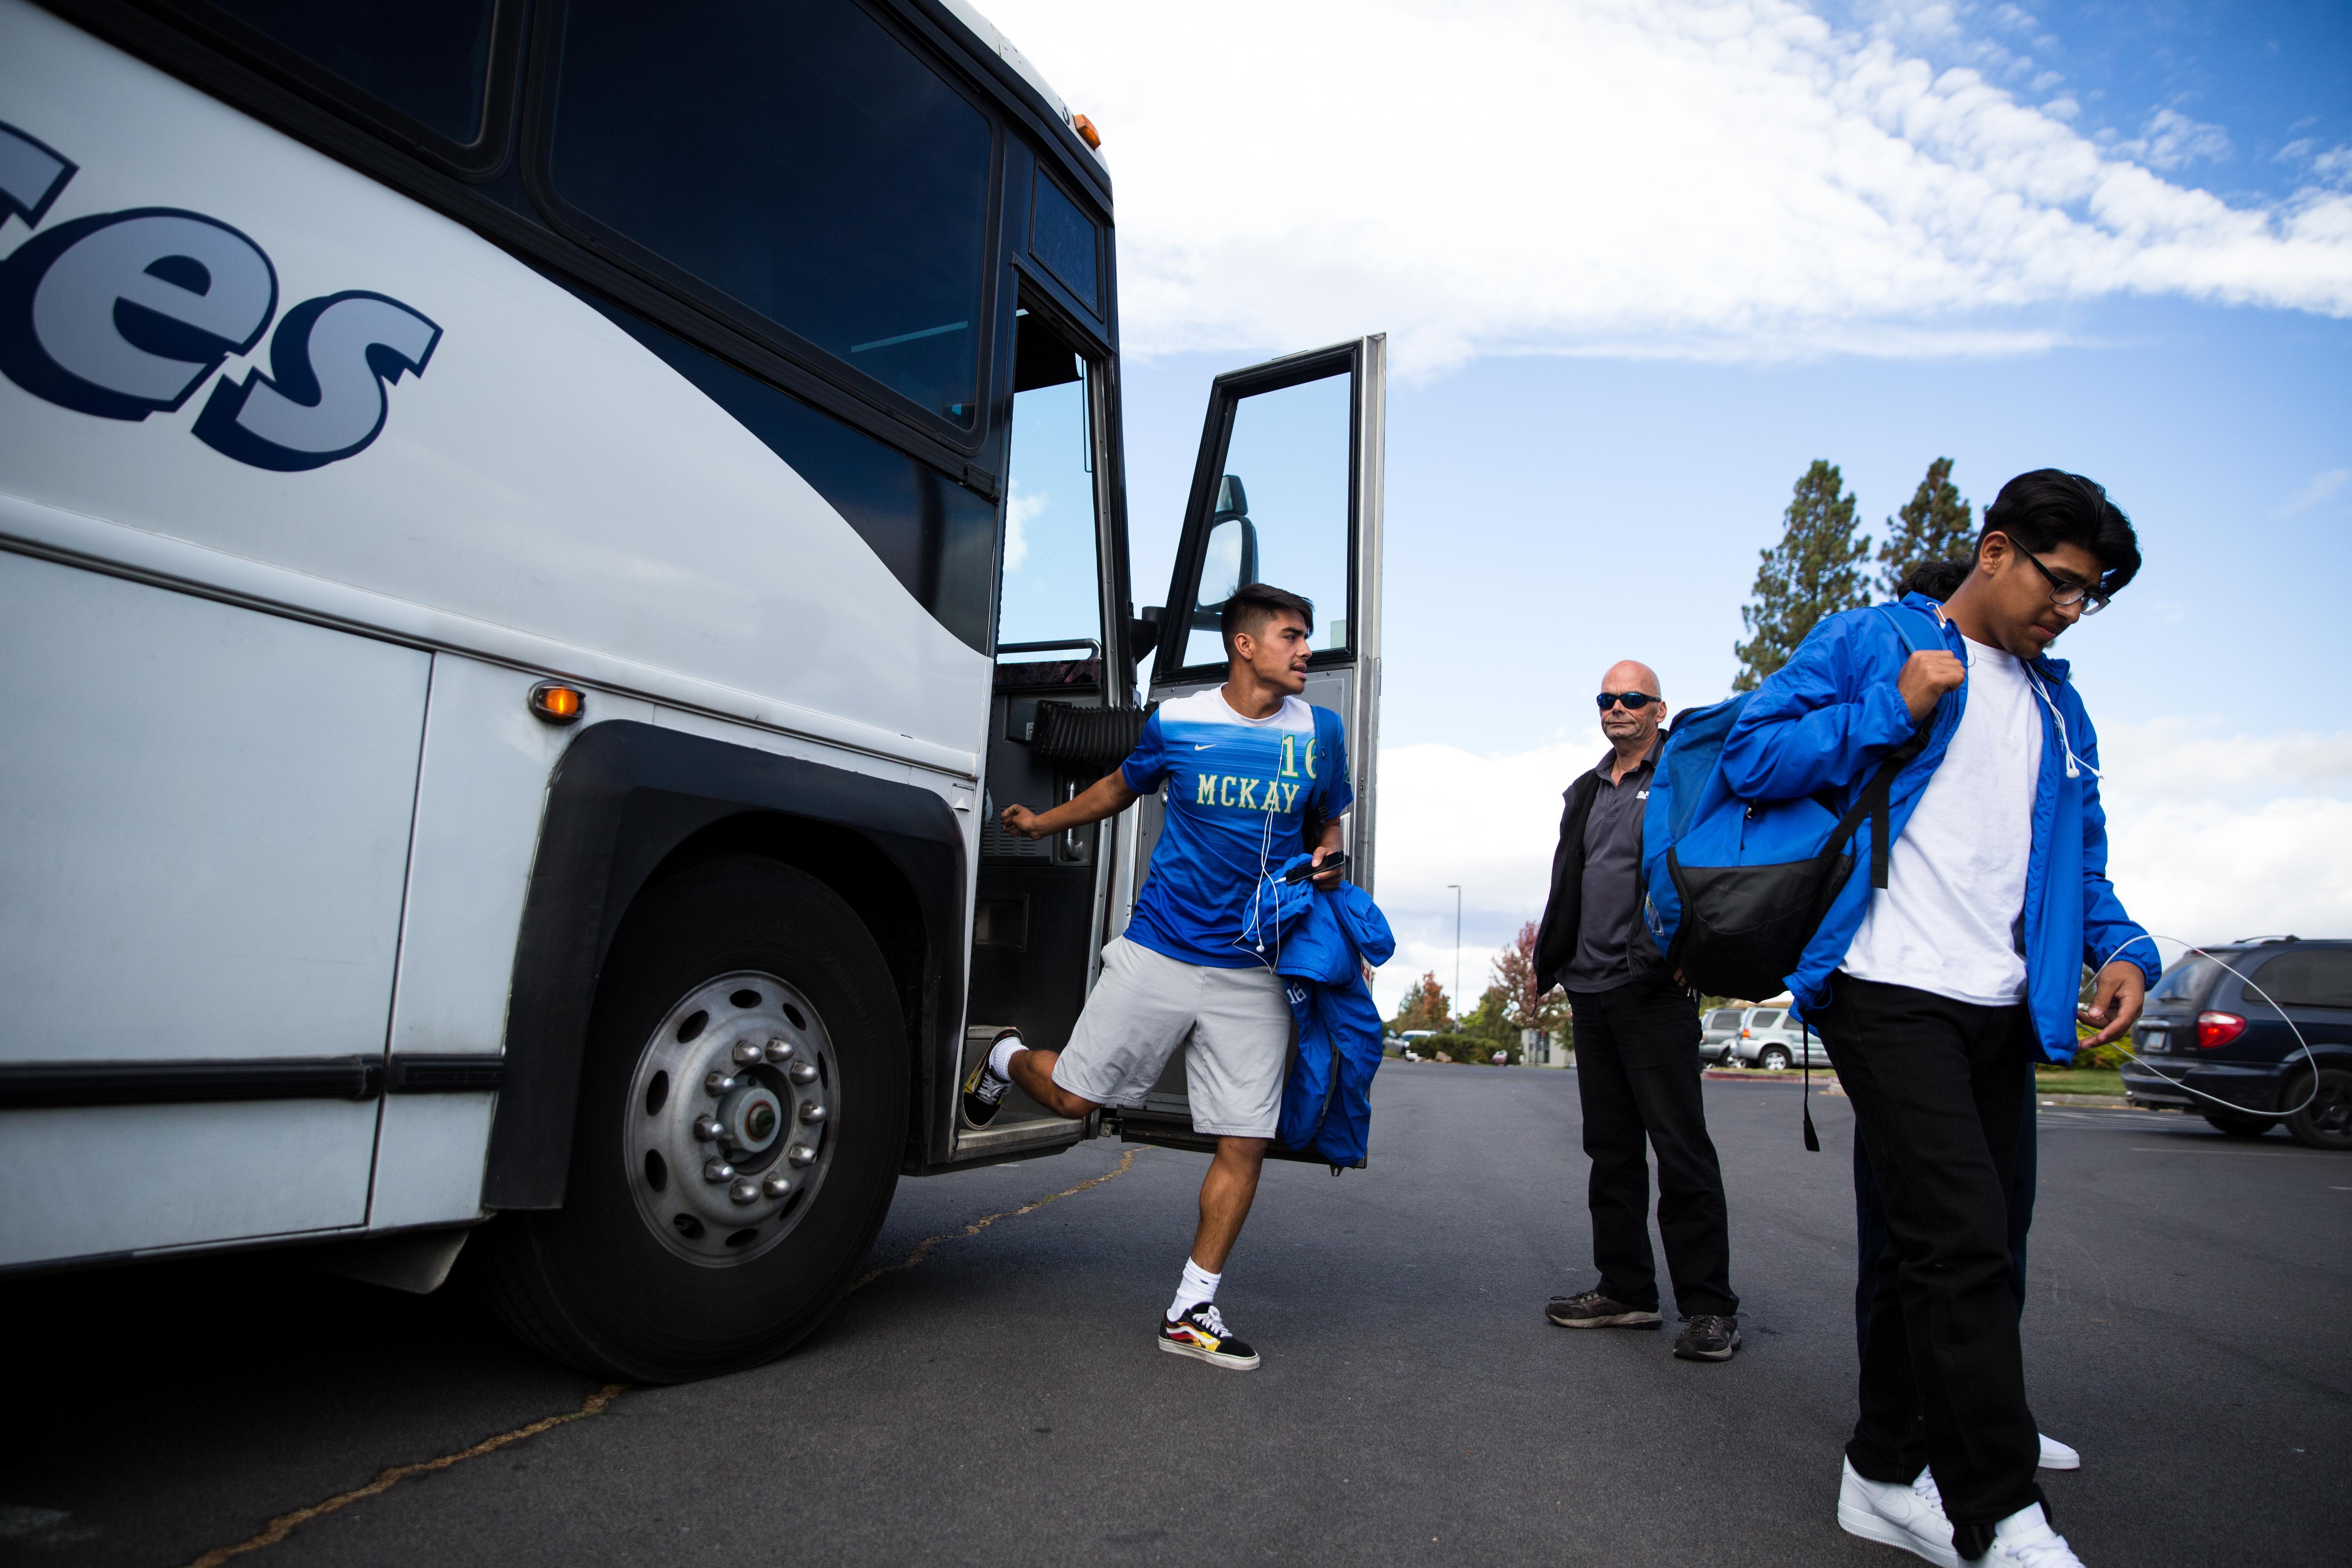 Luis Cuellar gets off the bus at Summit High School in Bend. The trip from Salem to Bend takes about three hours in good weather.